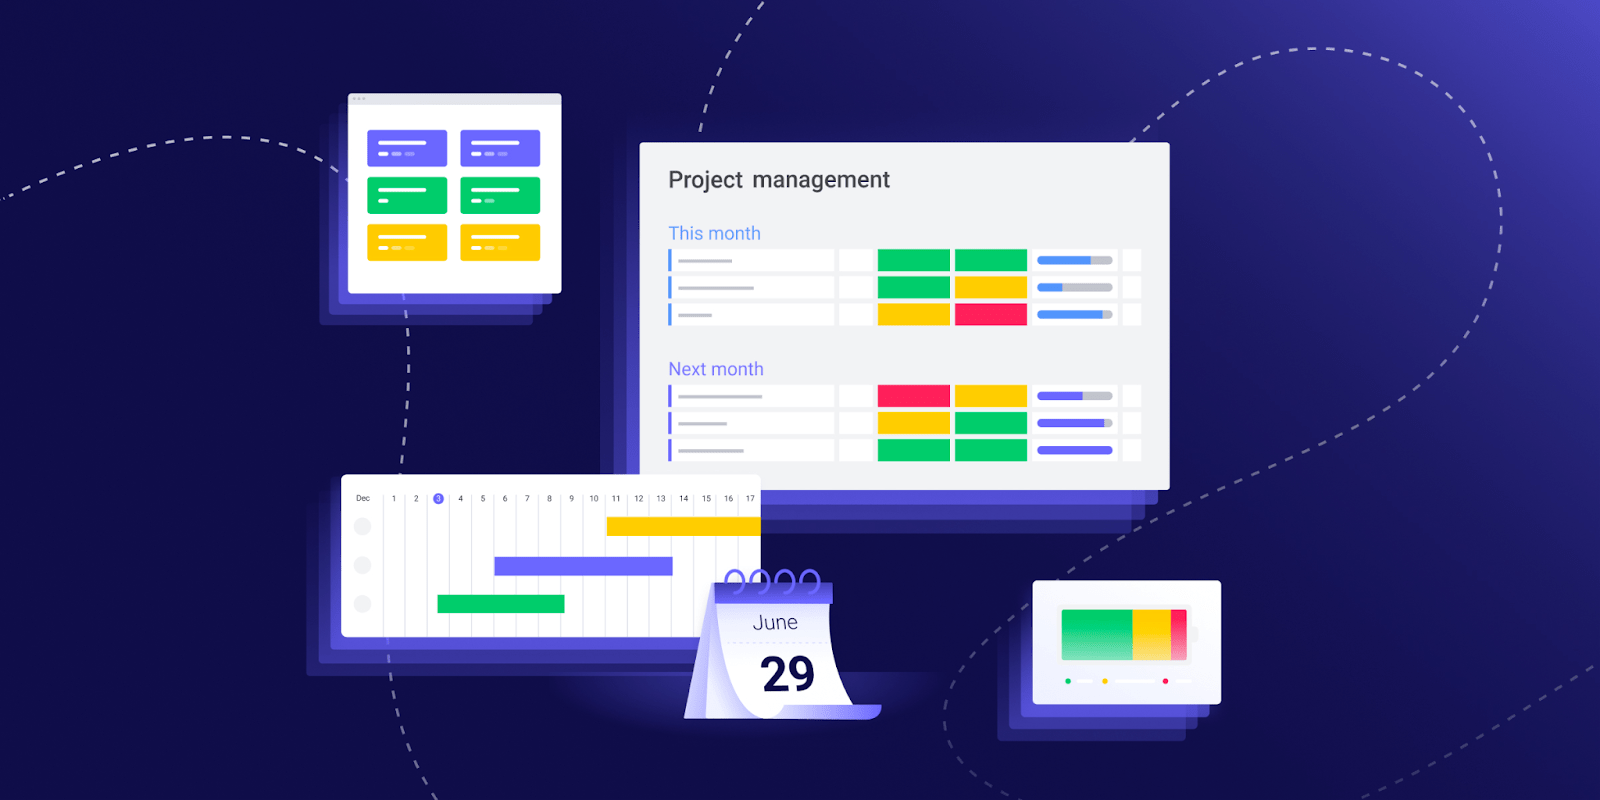 7 ways an integrated project management platform will make your job easier